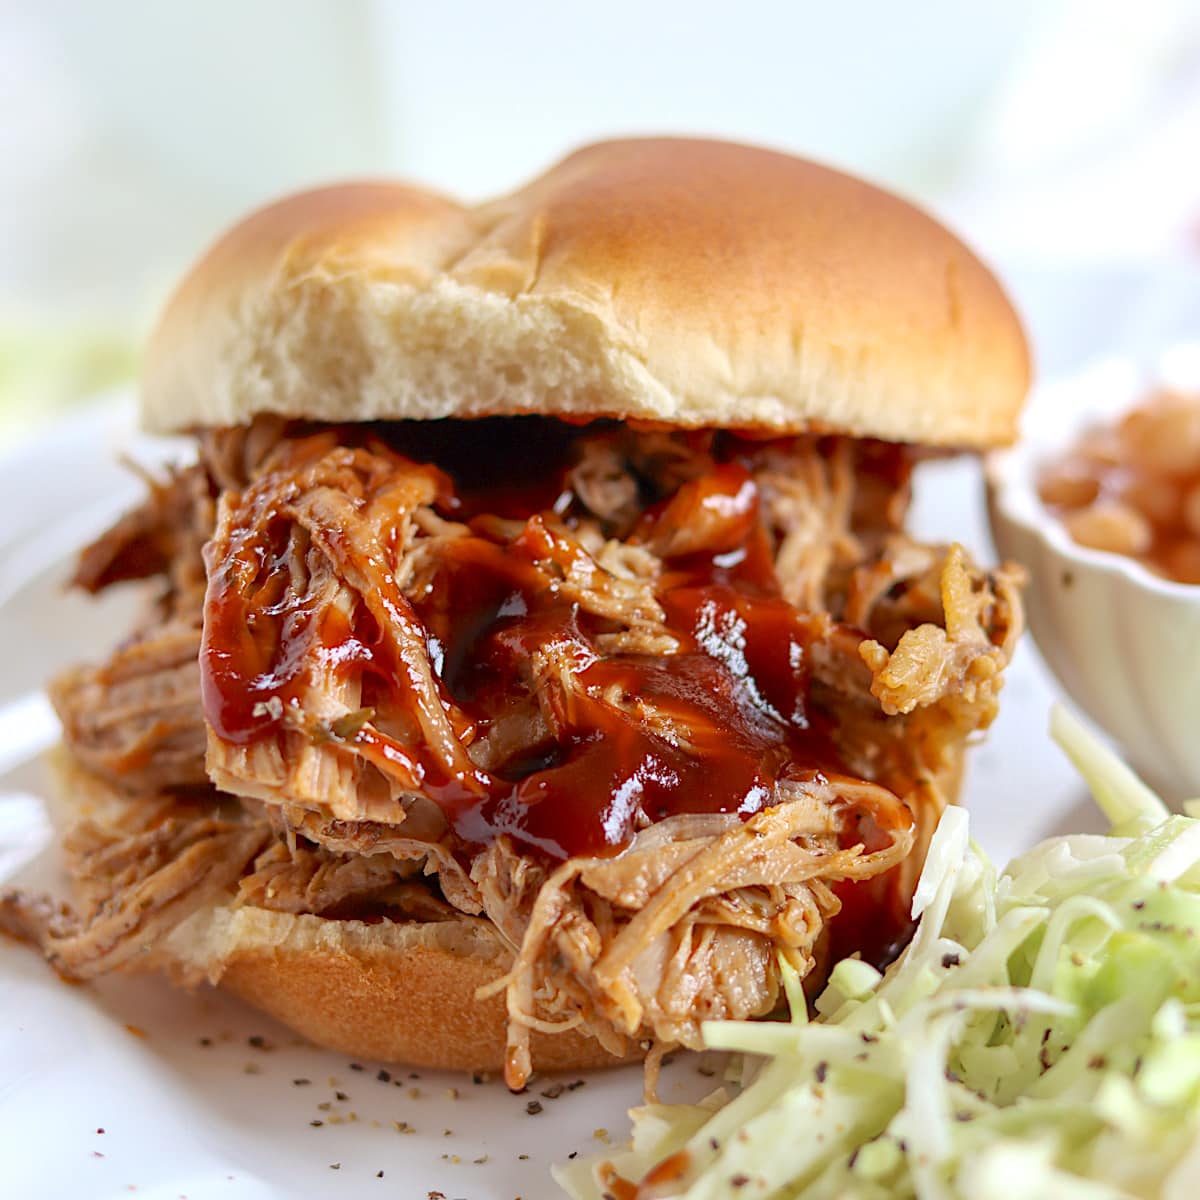 Juicy tender pulled pork slathered with barbecue sauce on a hamburger bun.